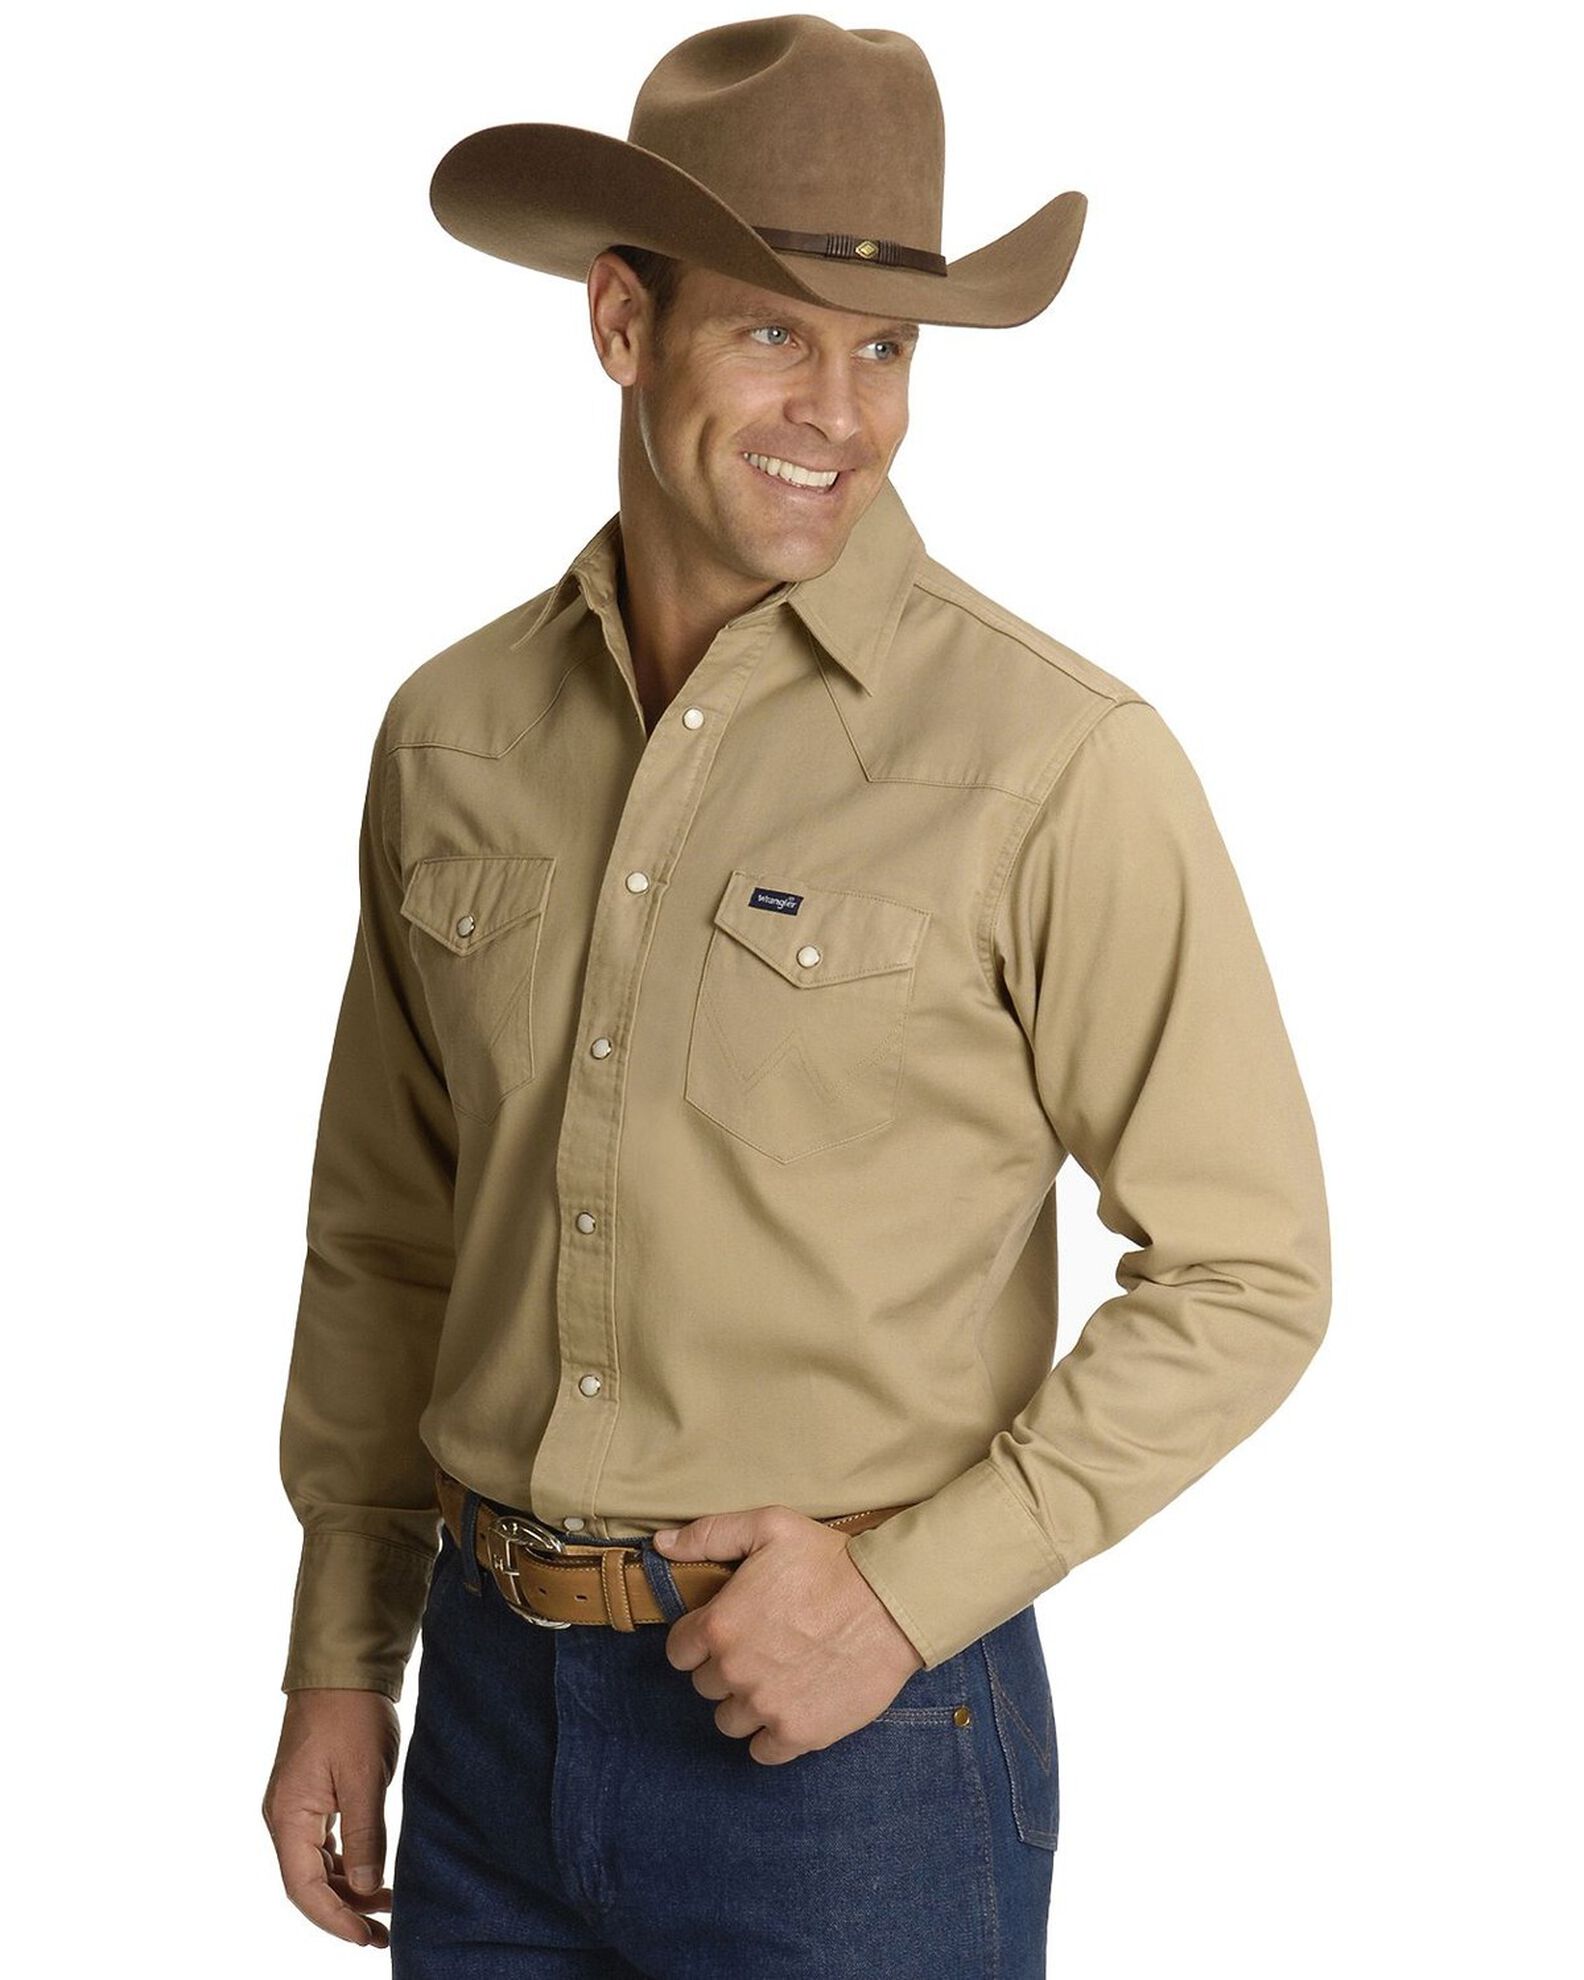 Wrangler Men's Solid Twill Cowboy Cut Long Sleeve Work Shirt - Tall -  Country Outfitter